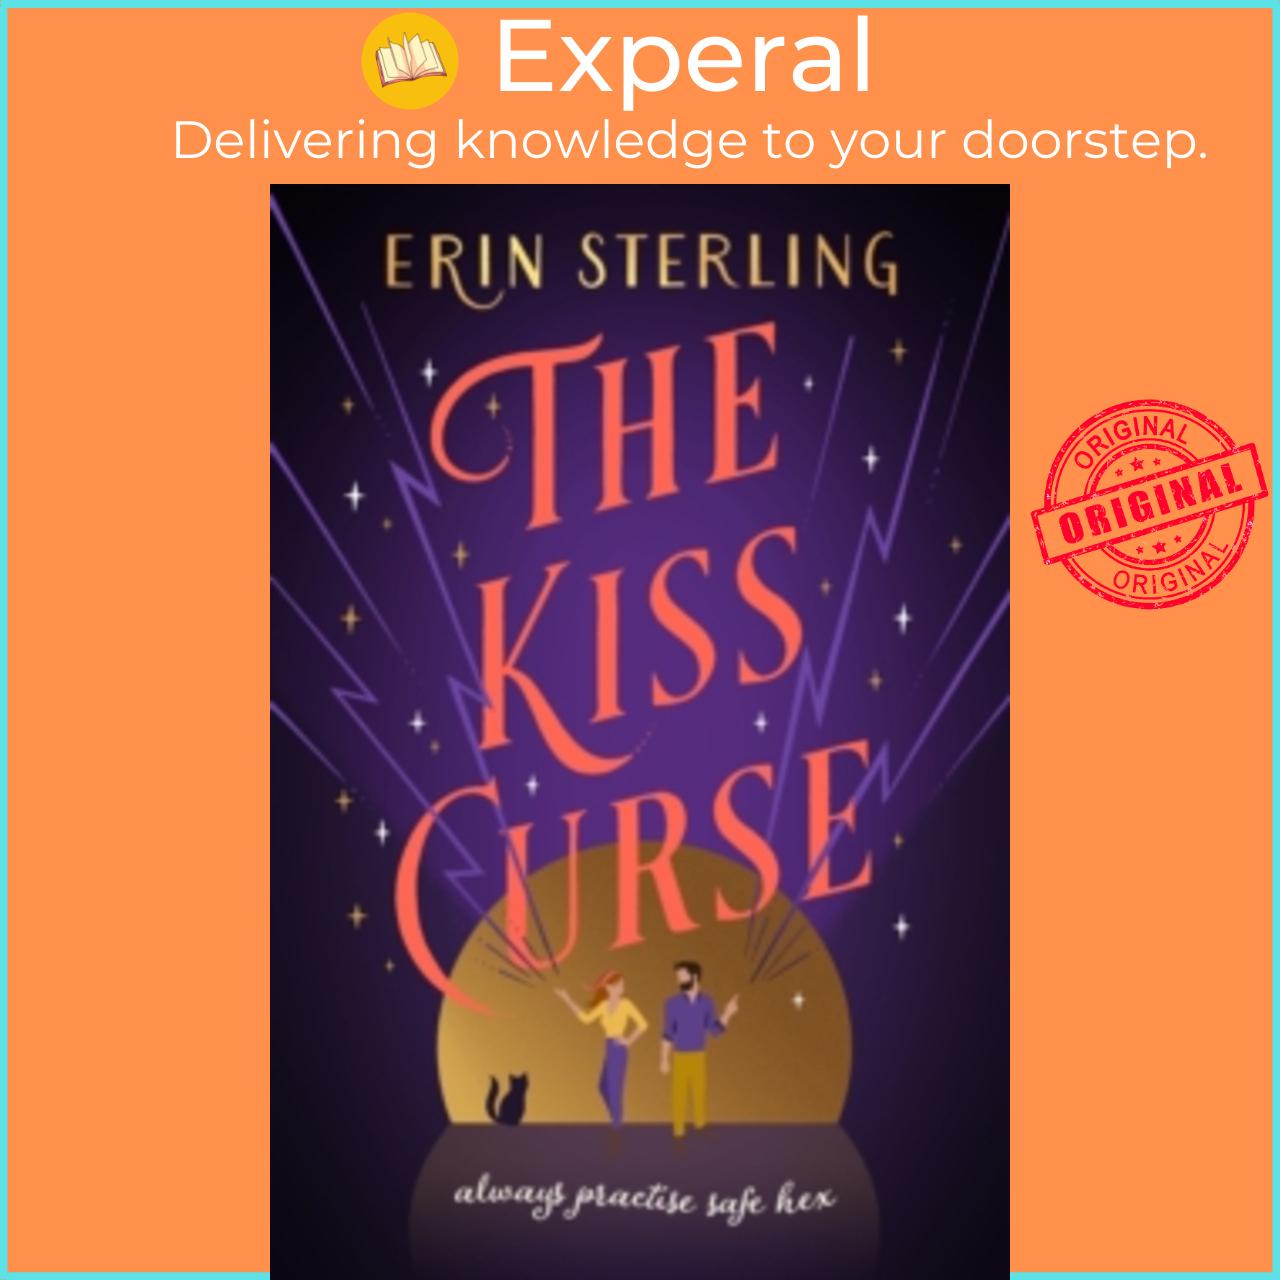 Sách - The Kiss Curse : The next spellbinding rom-com from the author of the Ti by Erin Sterling (UK edition, paperback)